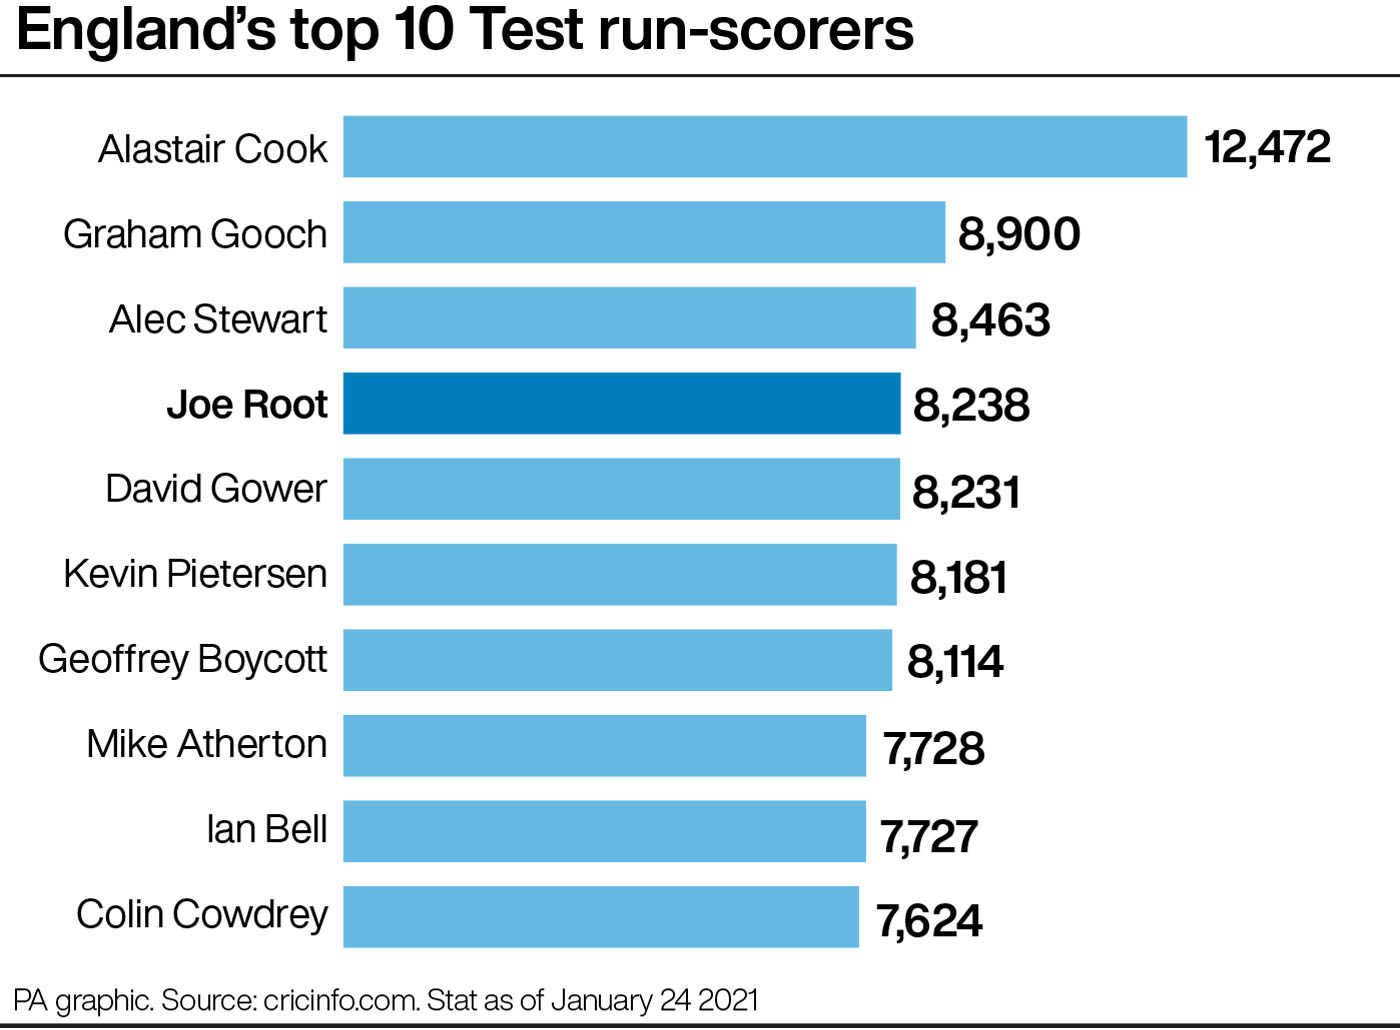 A graphic of England's top Test run-scorers